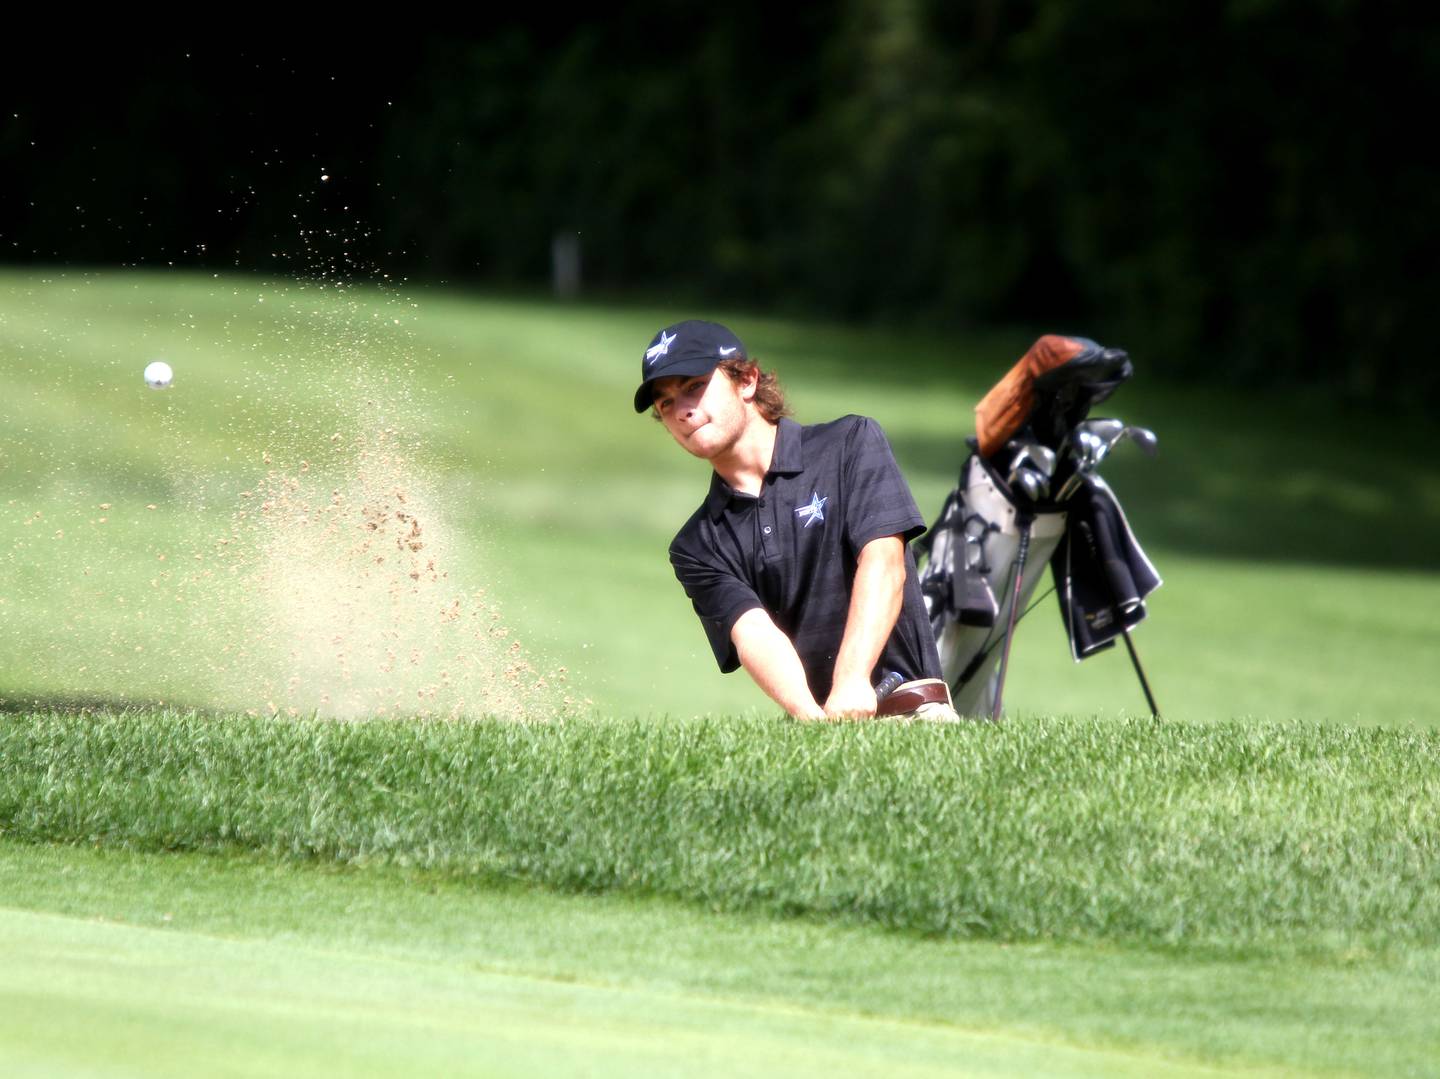 St. Charles North’s Clay Heilman hits out of the sand during the McChesney Cup golf tournament at the Geneva Golf Club on Monday, Aug. 15, 2022.